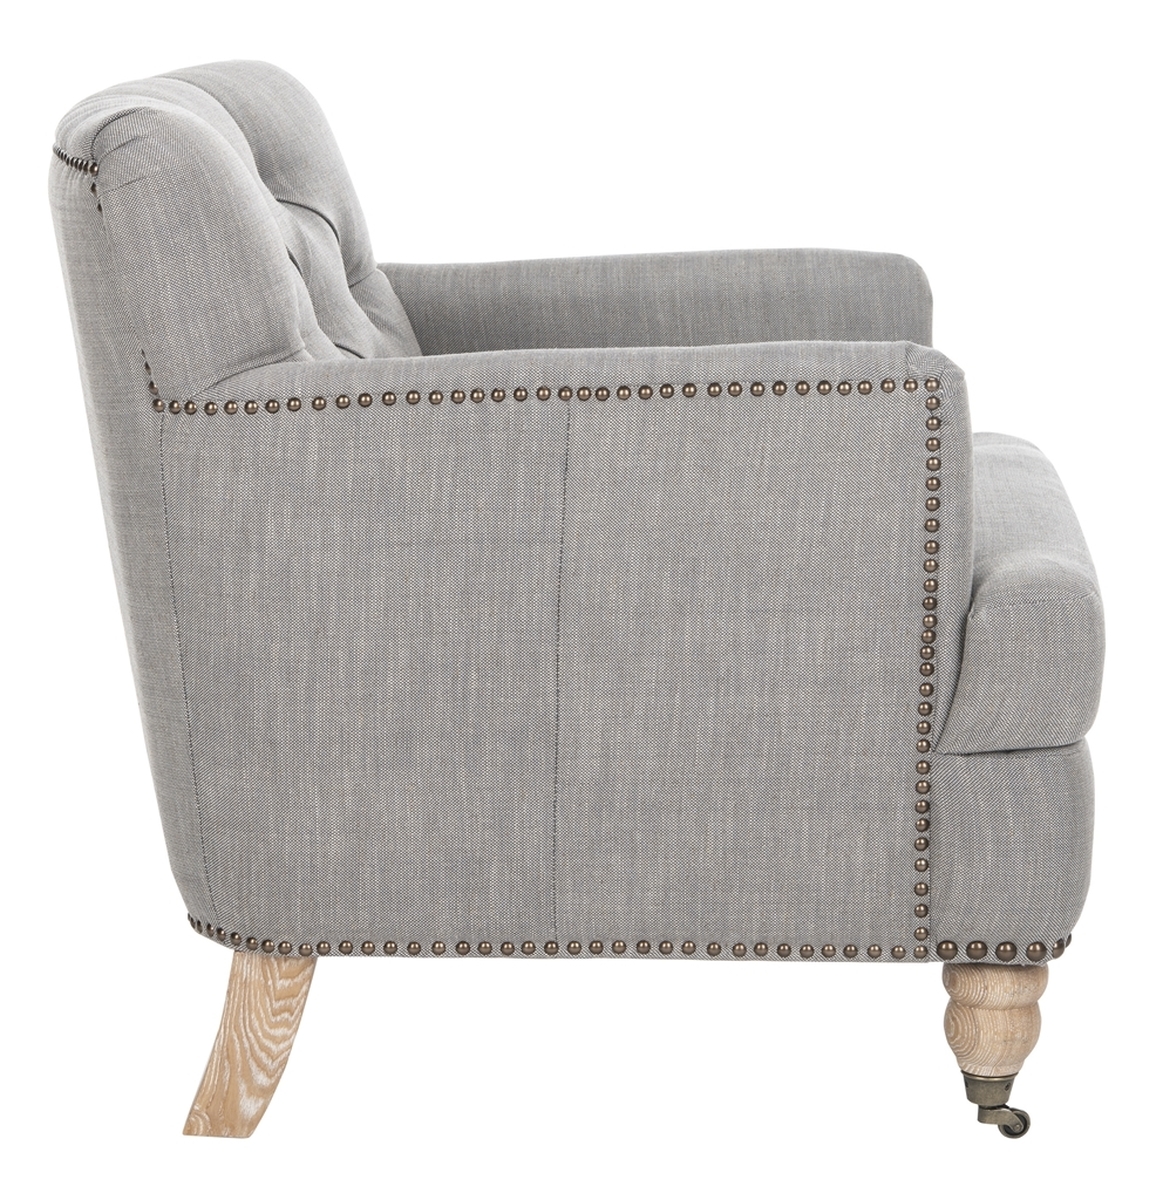 Colin Tufted Club Chair - Stone/Grey/White Wash - Arlo Home - Image 2